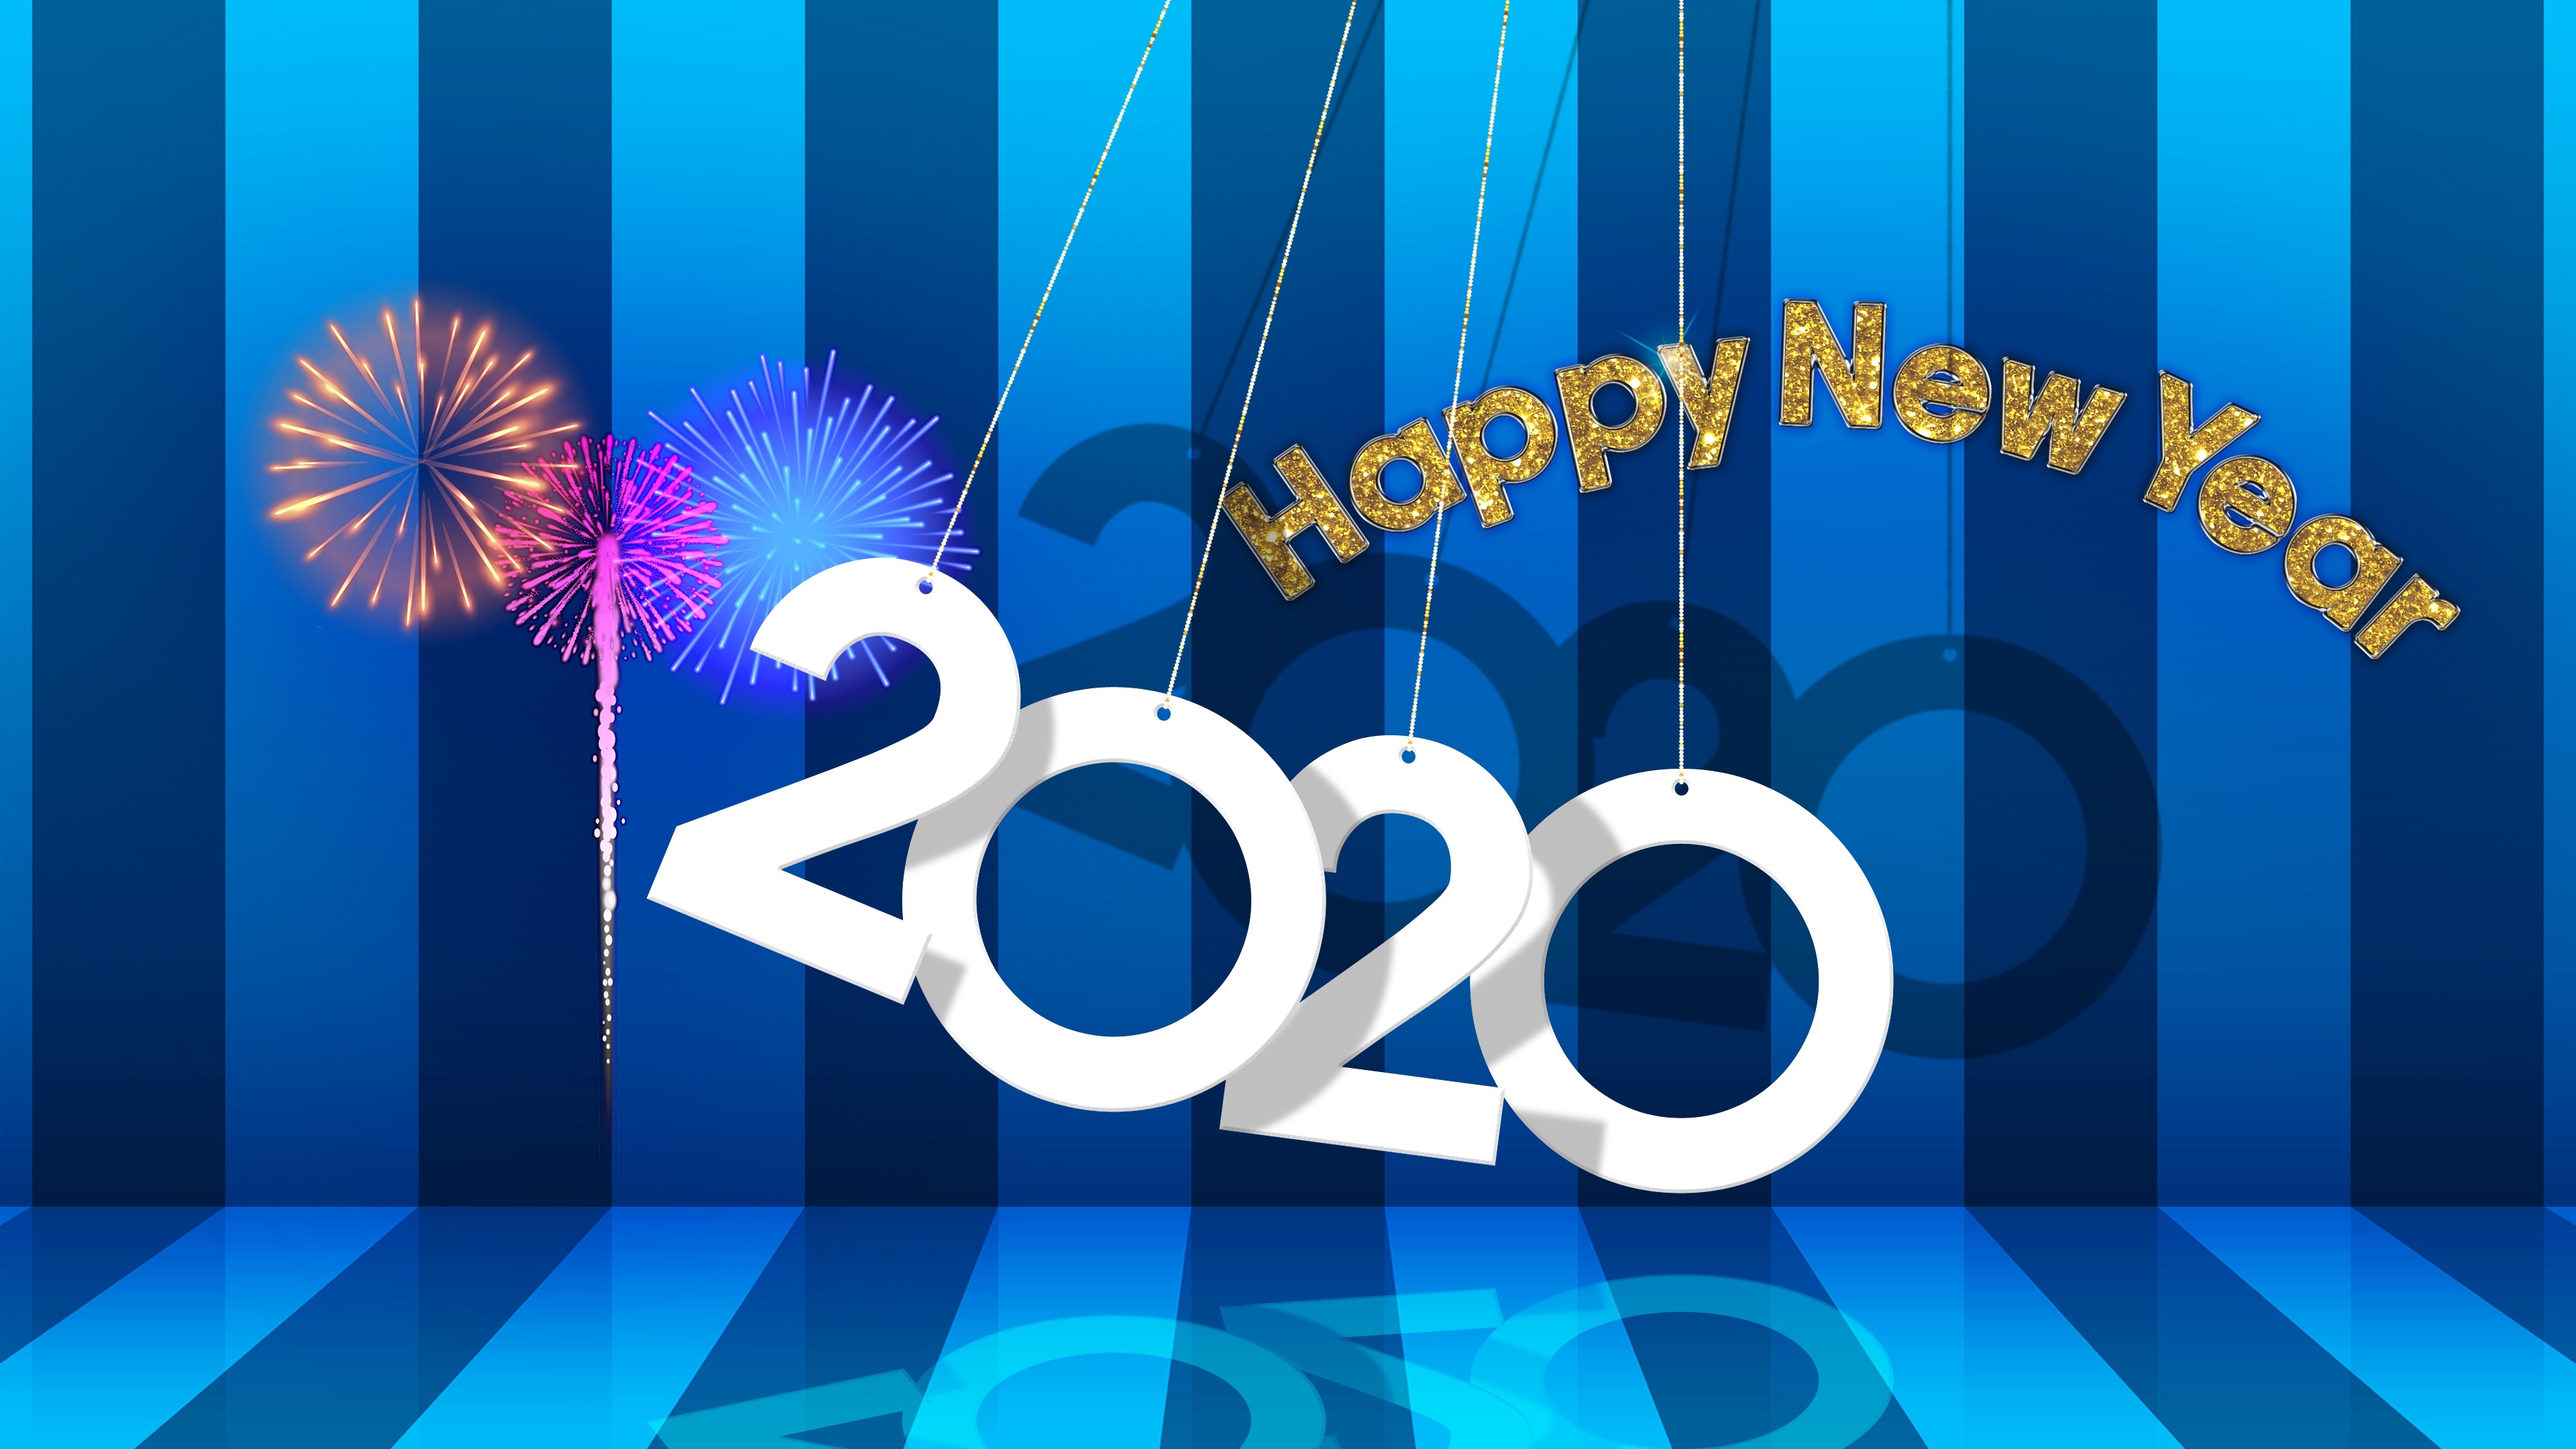 New Year 2020 Wallpaper HD Other 4K Wallpapers Images Photos